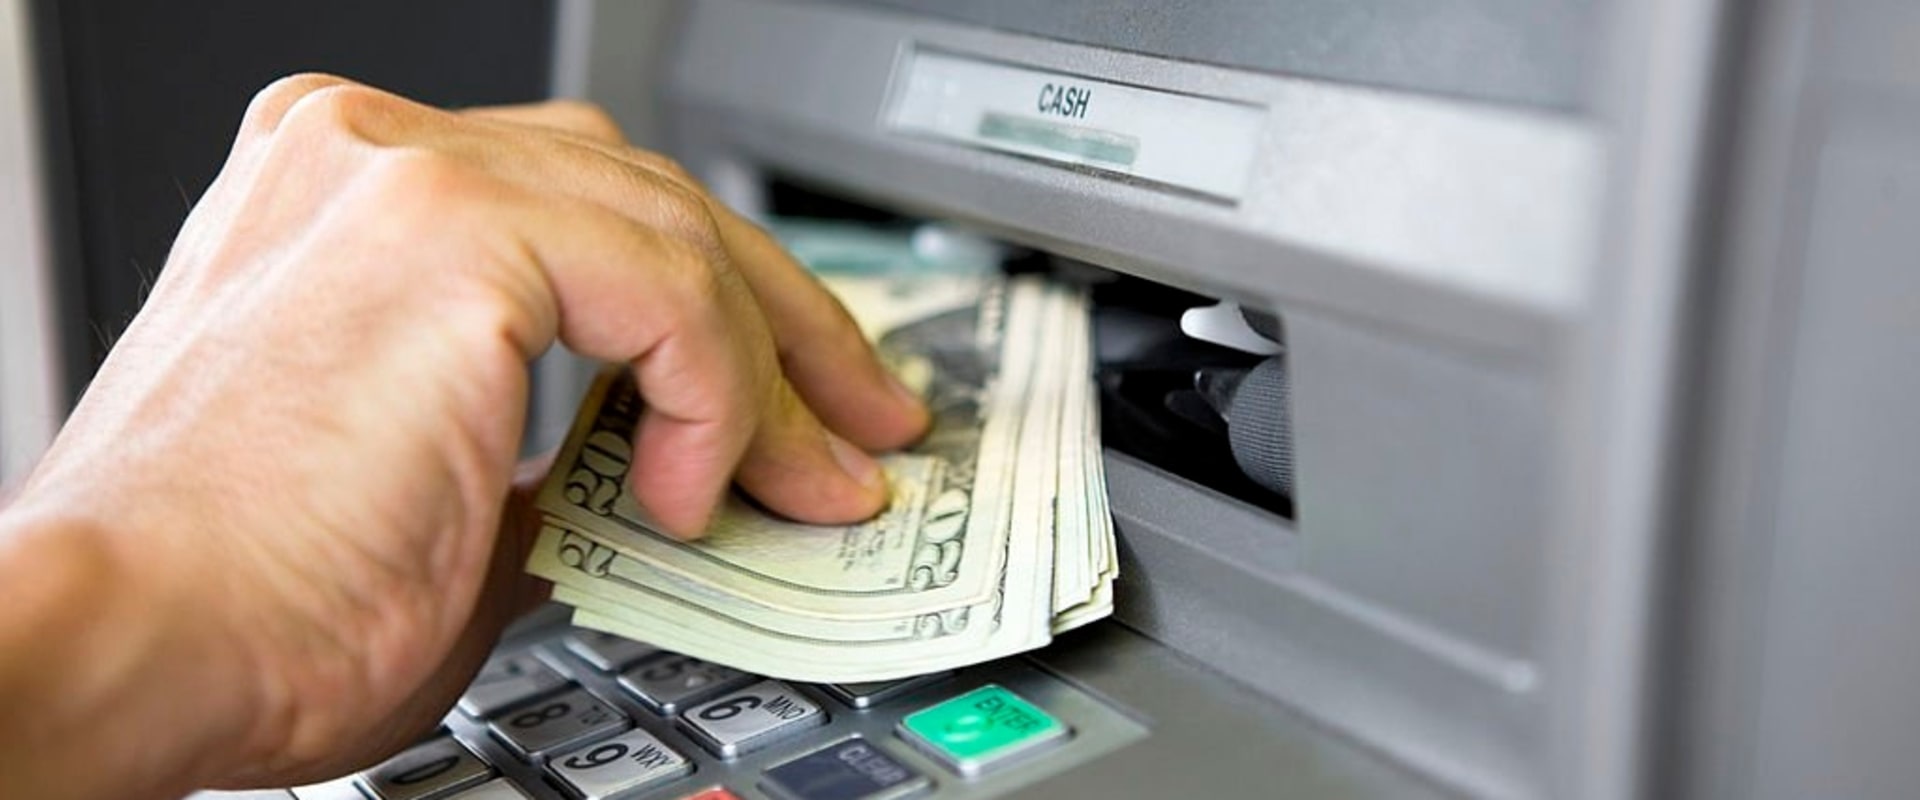 Can i withdraw money from a frozen account?